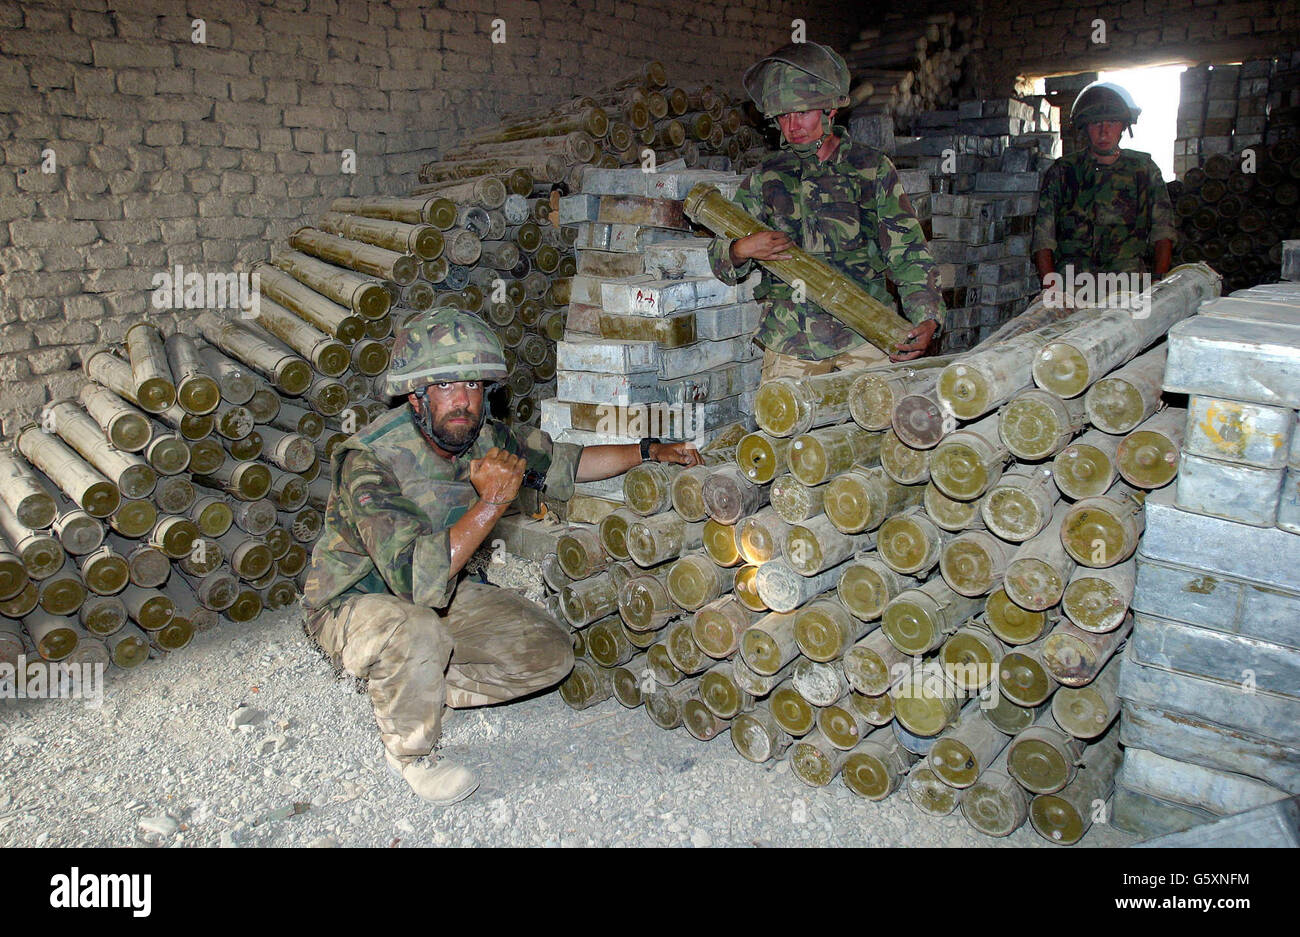 Afghanistan weapons found Stock Photo